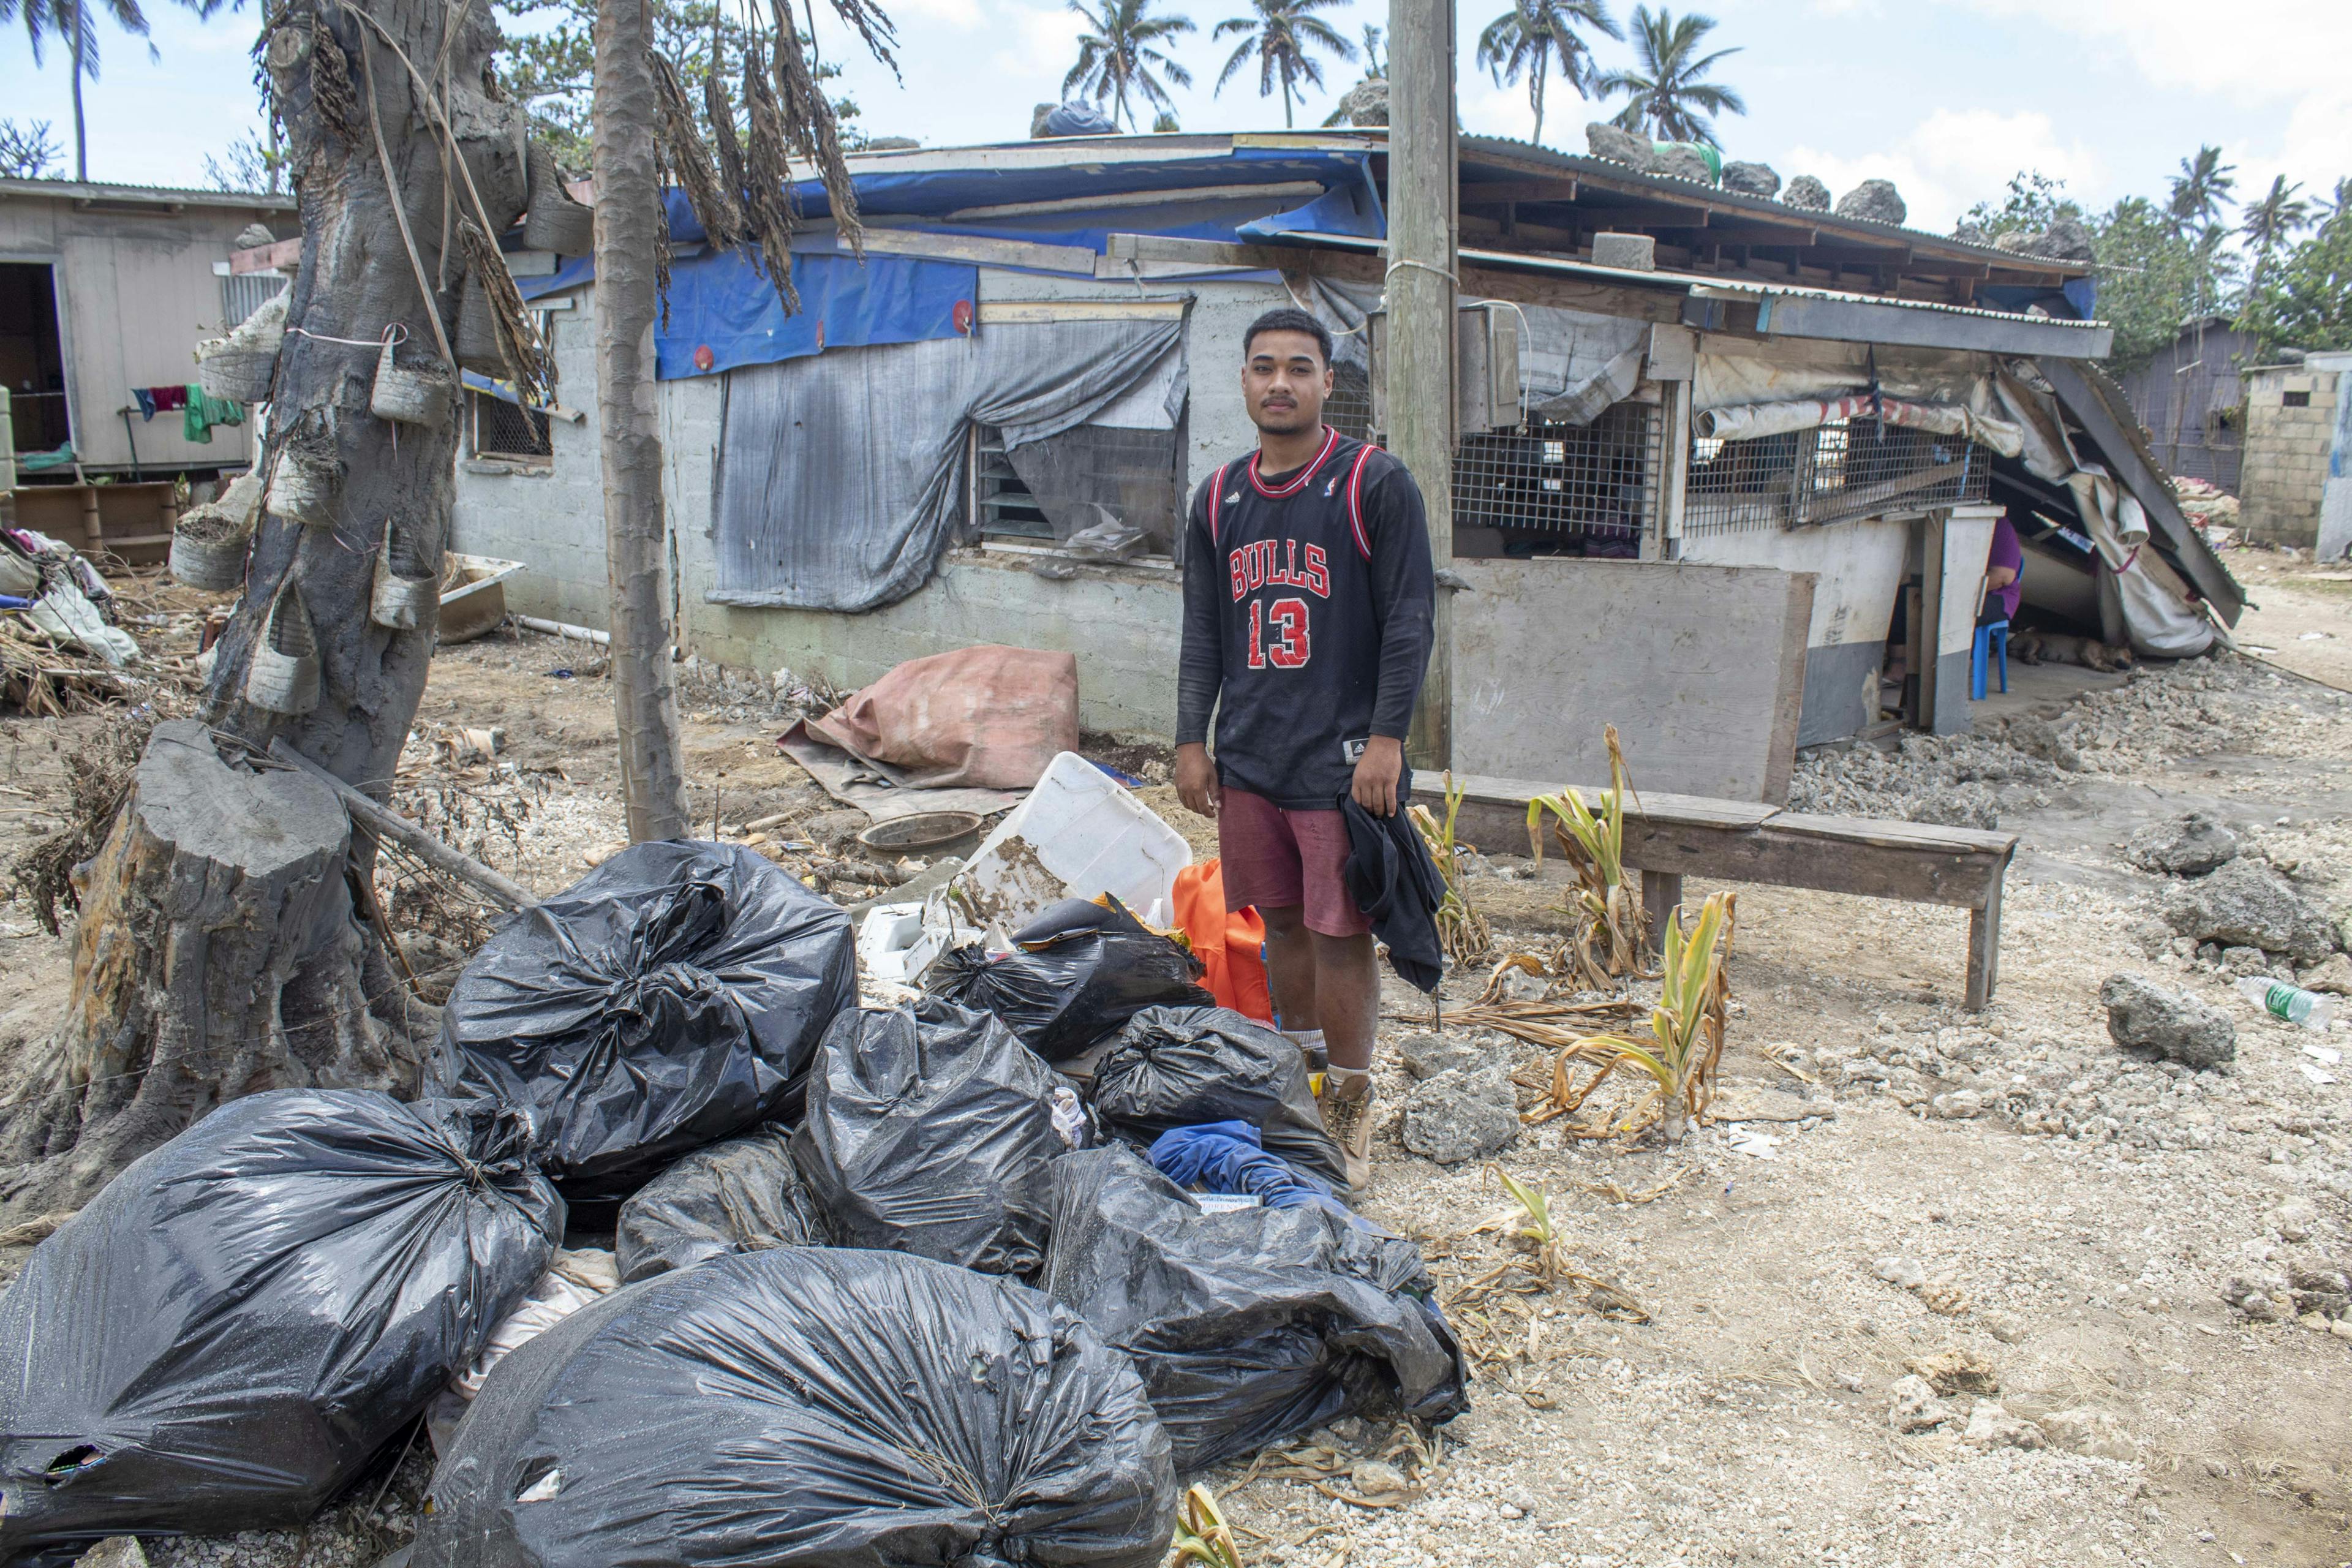 On 22 January 2022, (left) Sione Falani Kuli Ha'apai, 18,  stands in front of his home in Sopu on Tongatapu, Tonga’s main island, showing the damage caused by the Hunga Tonga-Hunga Ha’apai underwater volcano eruption and tsunami.   Esther Kuli Ha'apai, 52, is seen in the background on the right.